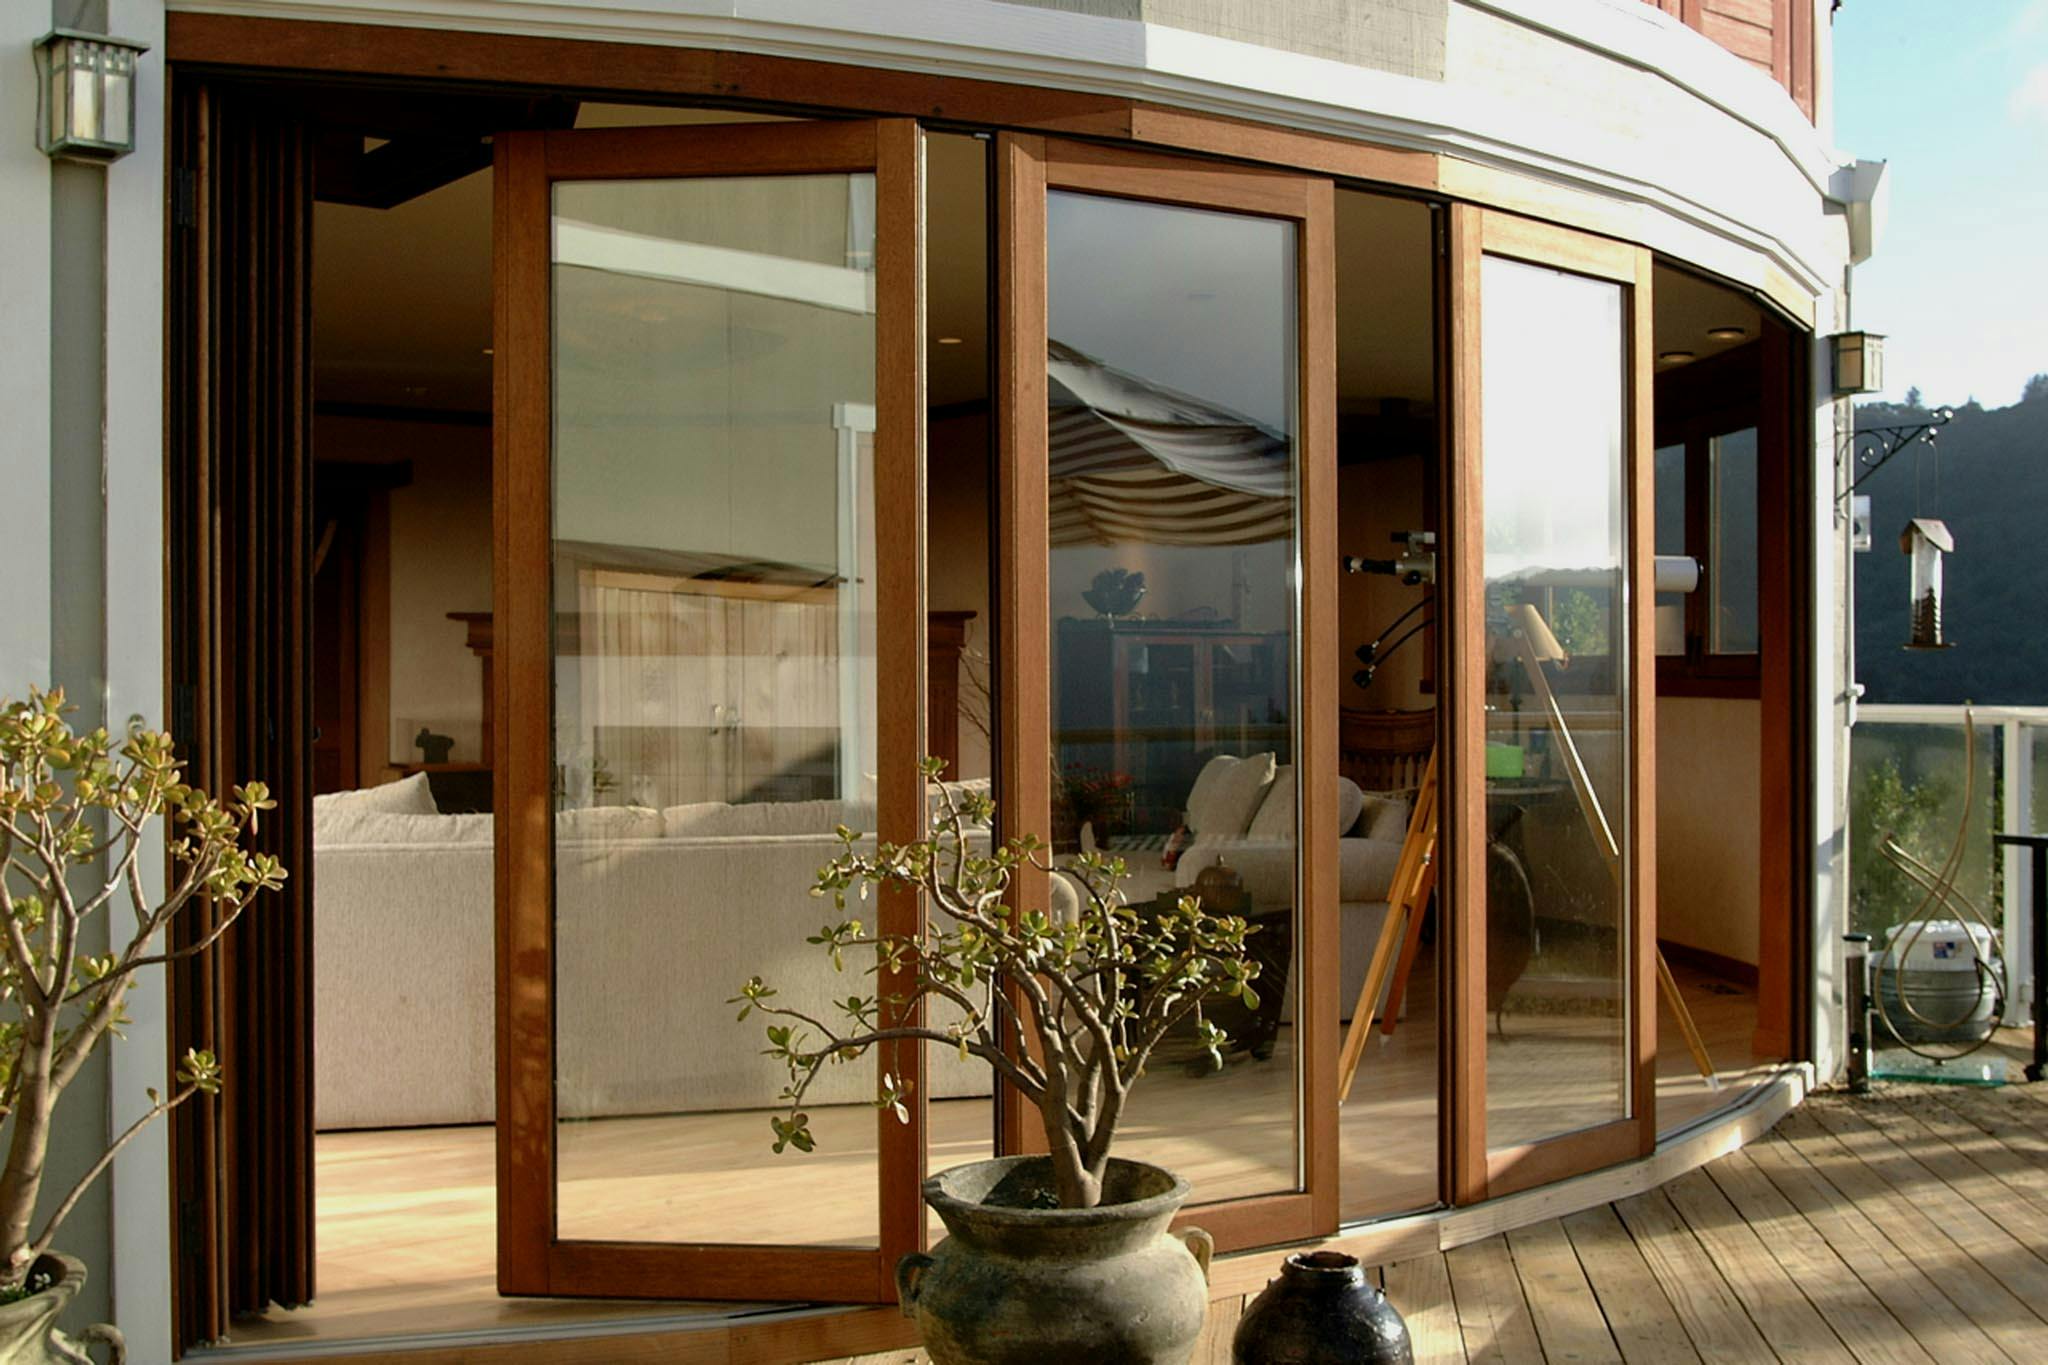 Use Sliding Glass Walls to Separate Indoor/Outdoor Living Spaces